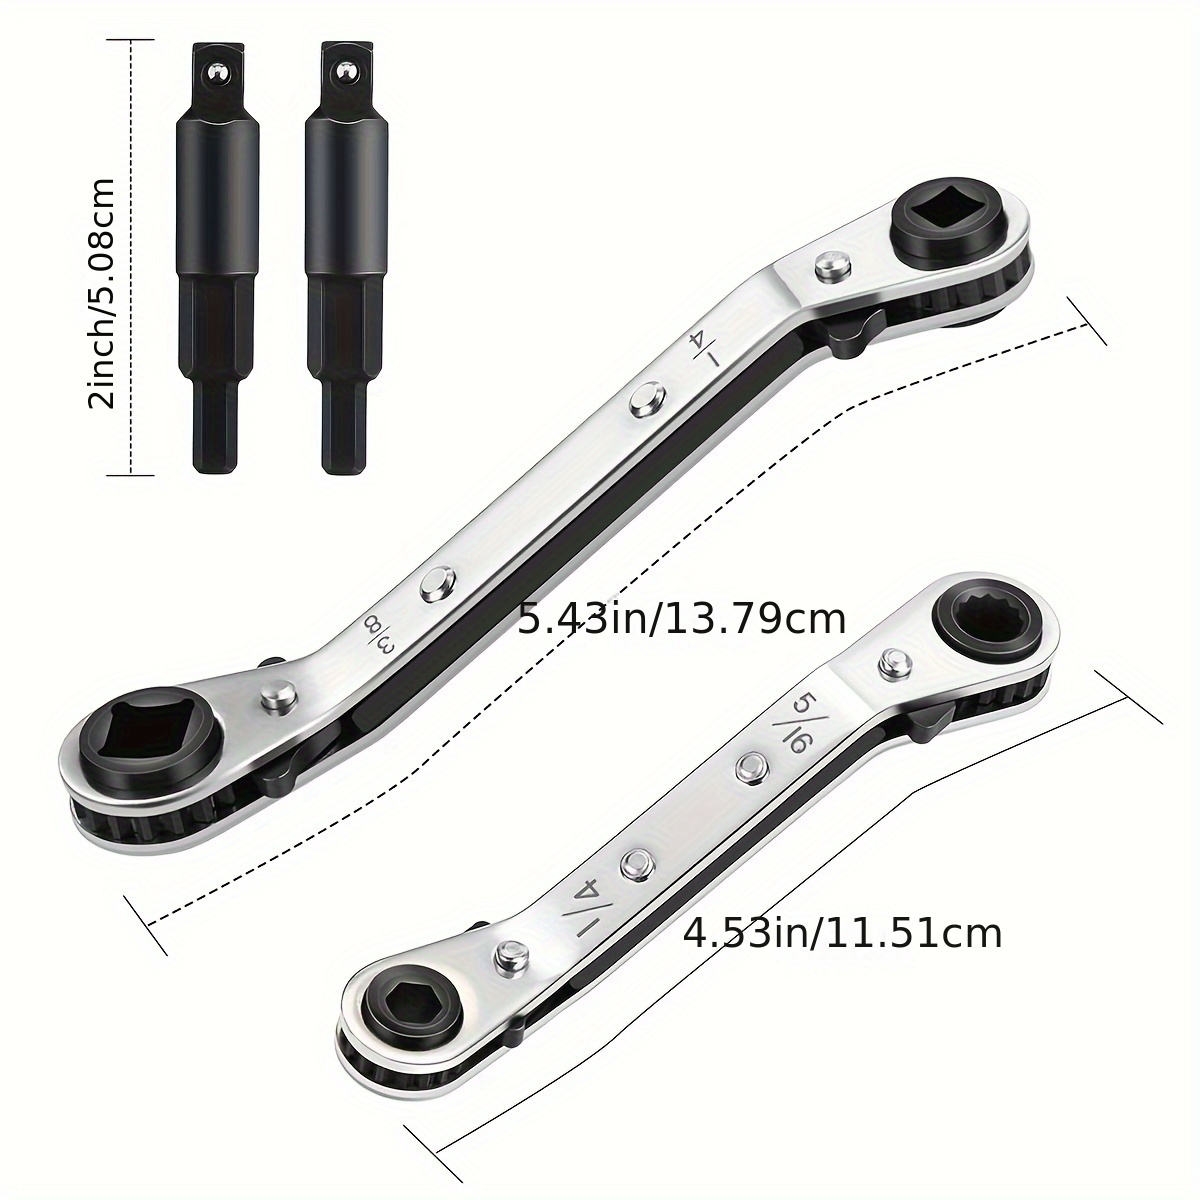 HVAC Service Wrench Set, Air Conditioner Valve Curved Ratchet Wrench (1/4,  3/8, 3/16, 5/16), with Hexagon Bit Adapter Tool Kit for Refrigeration